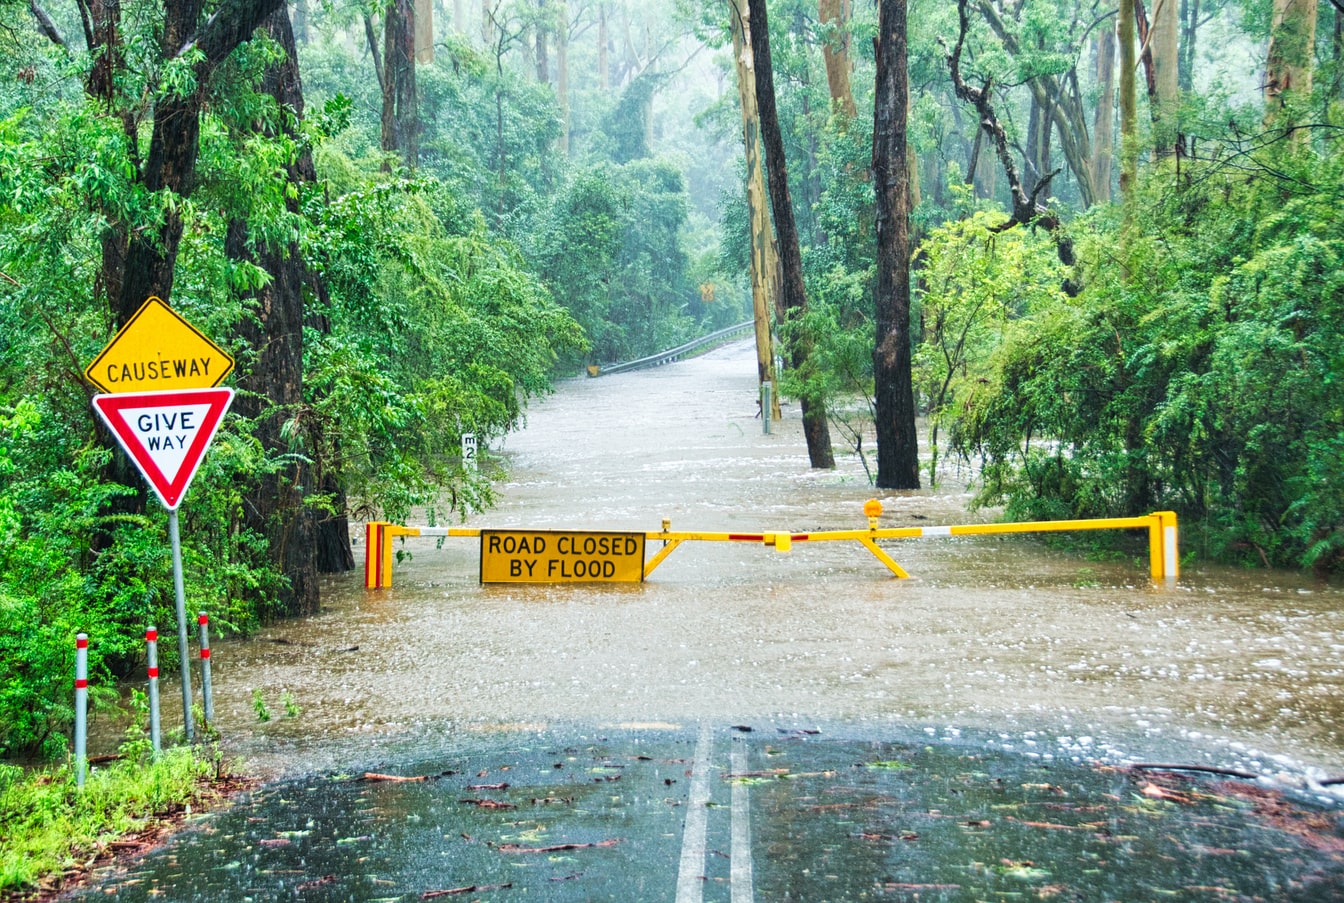 wet road conditions in Australia are like this sometimes